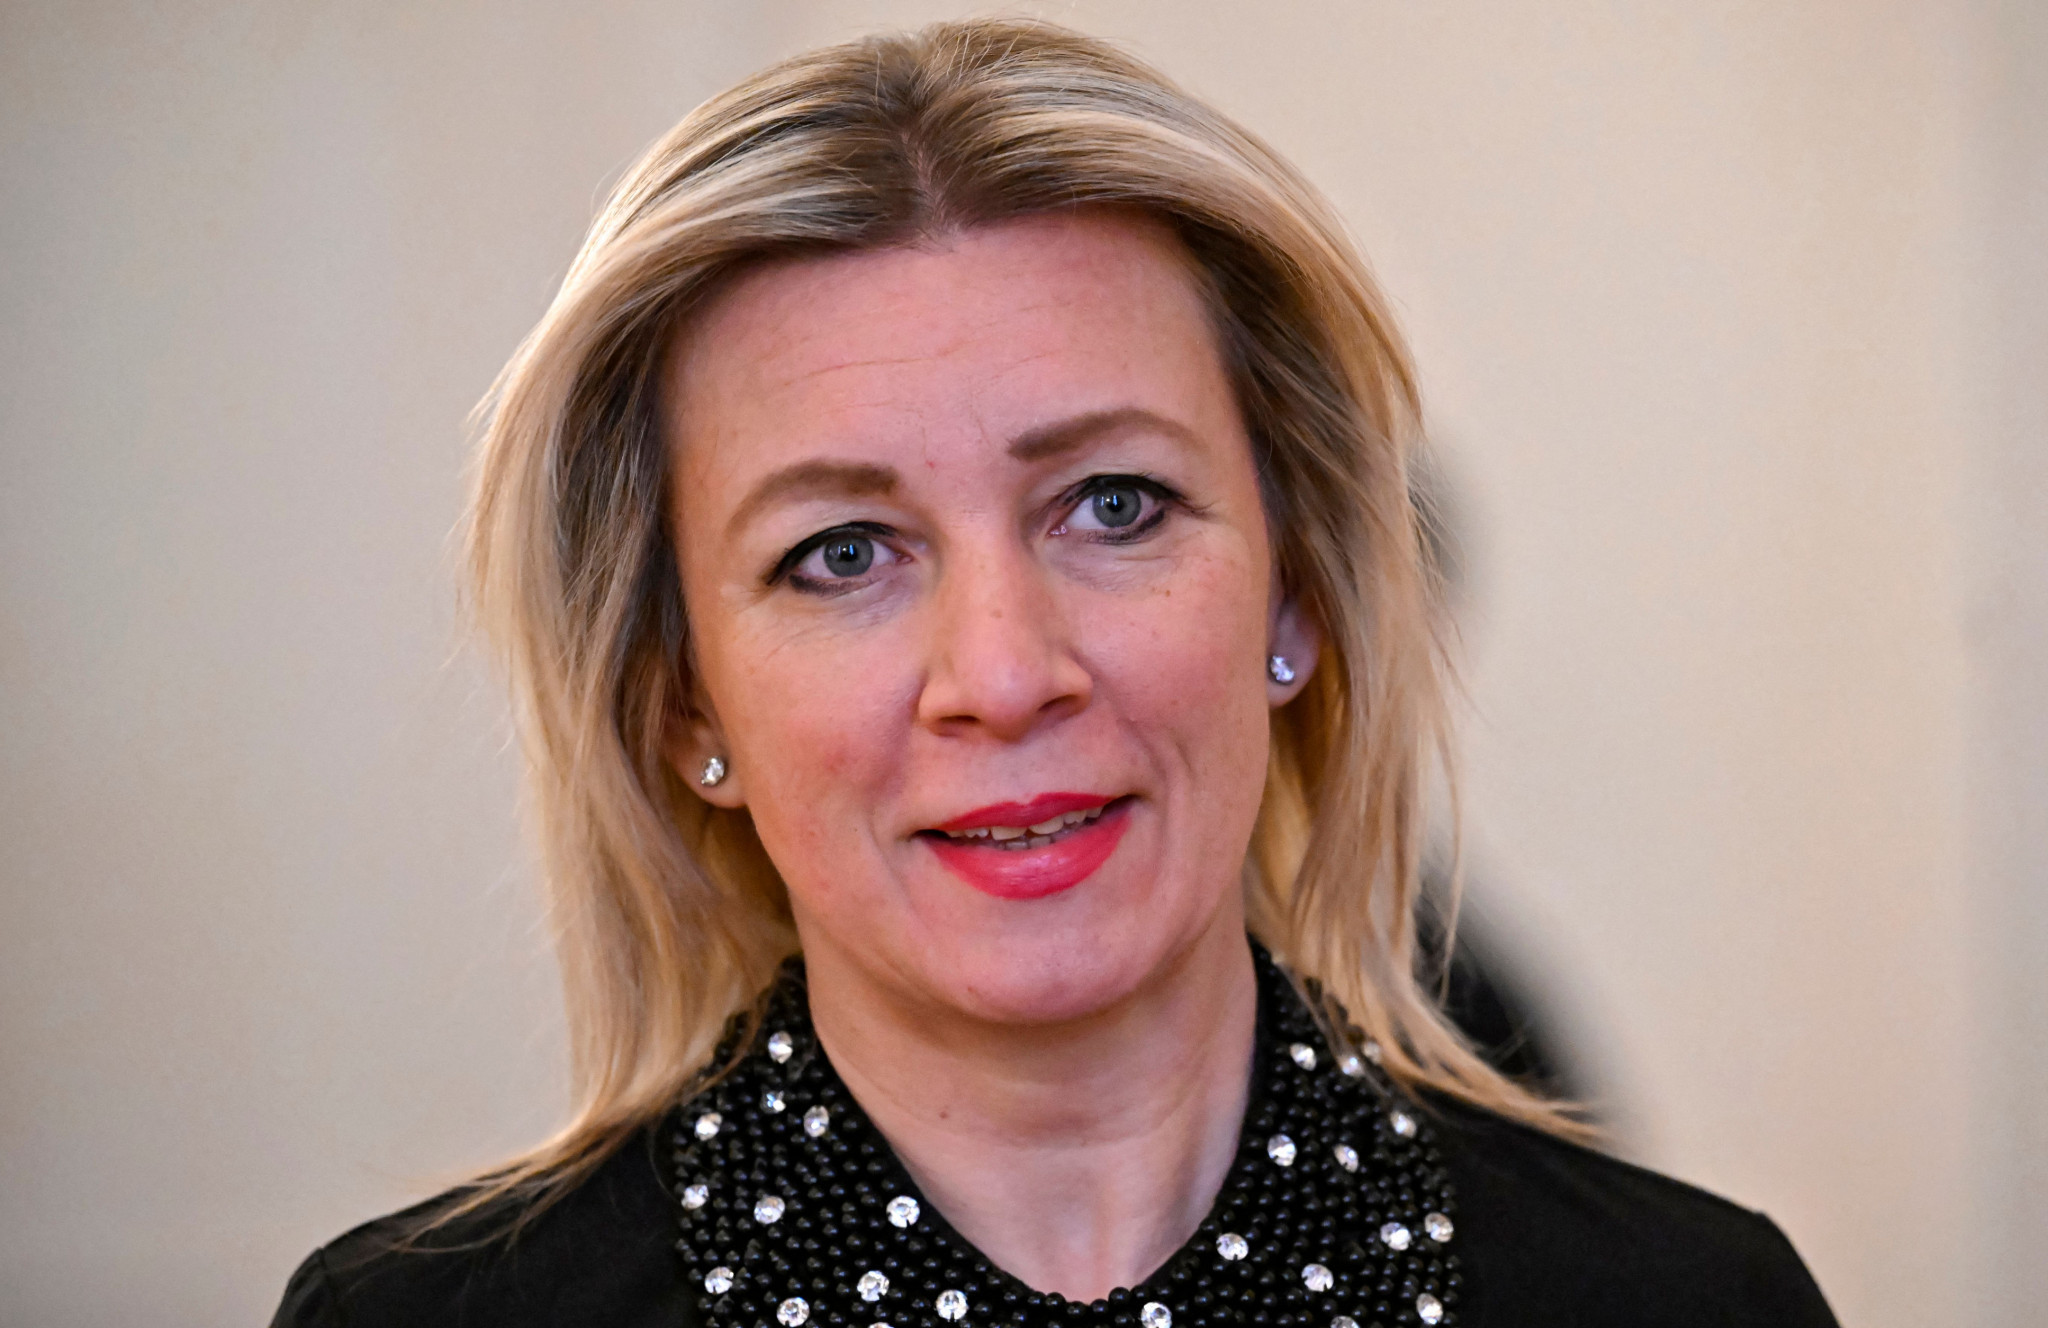 Maria Zakharova spoke for the Russian government in this regard. ©Getty Images